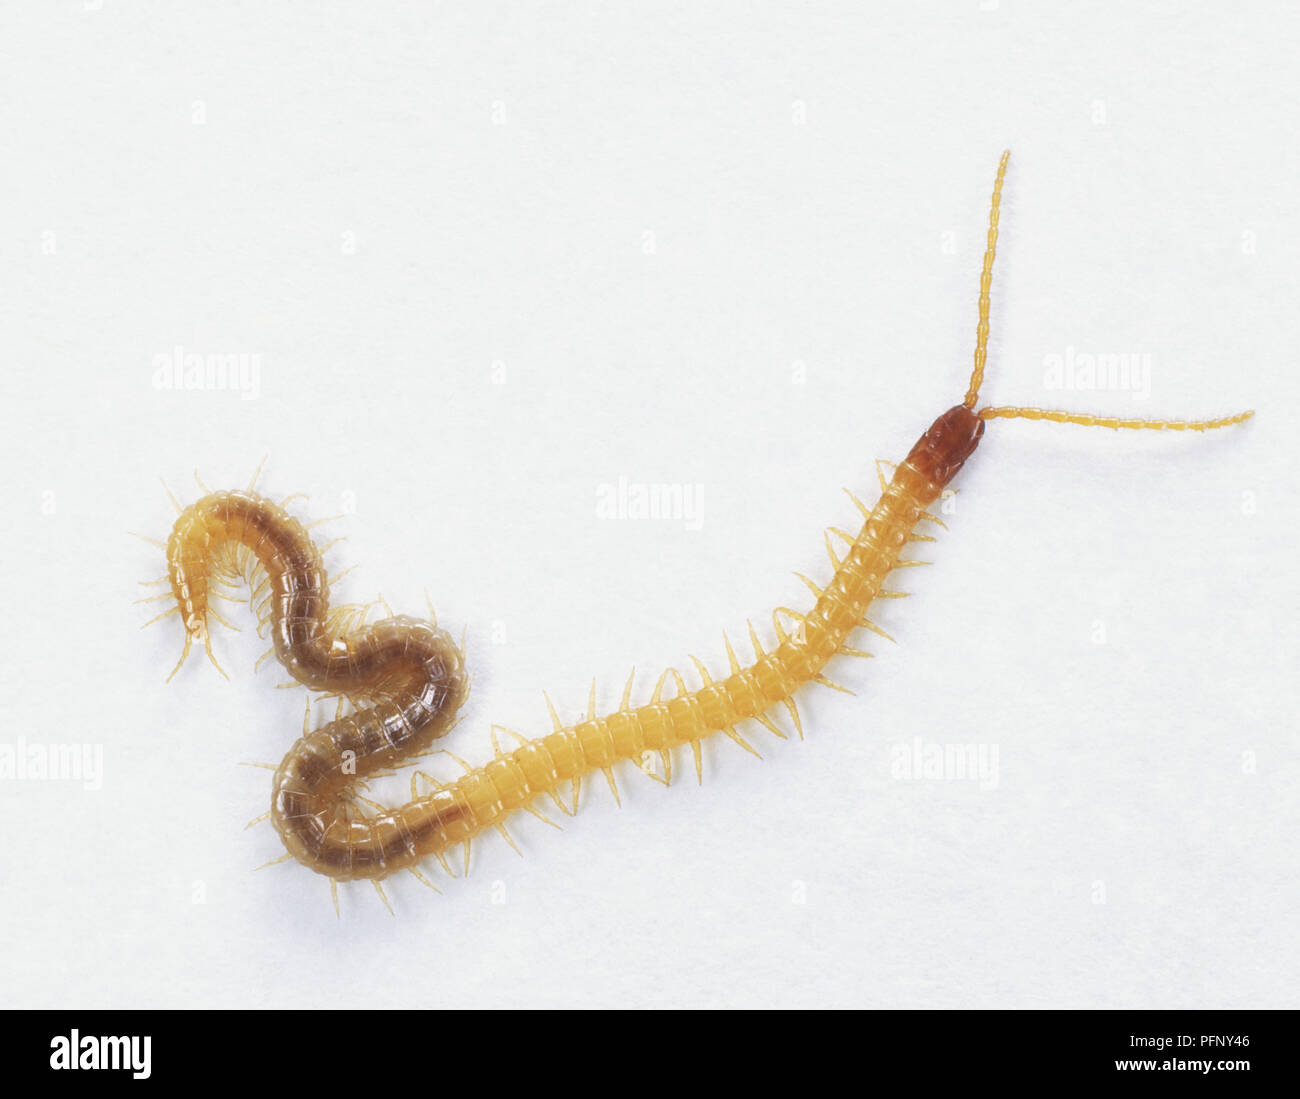 Centipede (Chilopoda) with its back end curled up, view from above Stock Photo